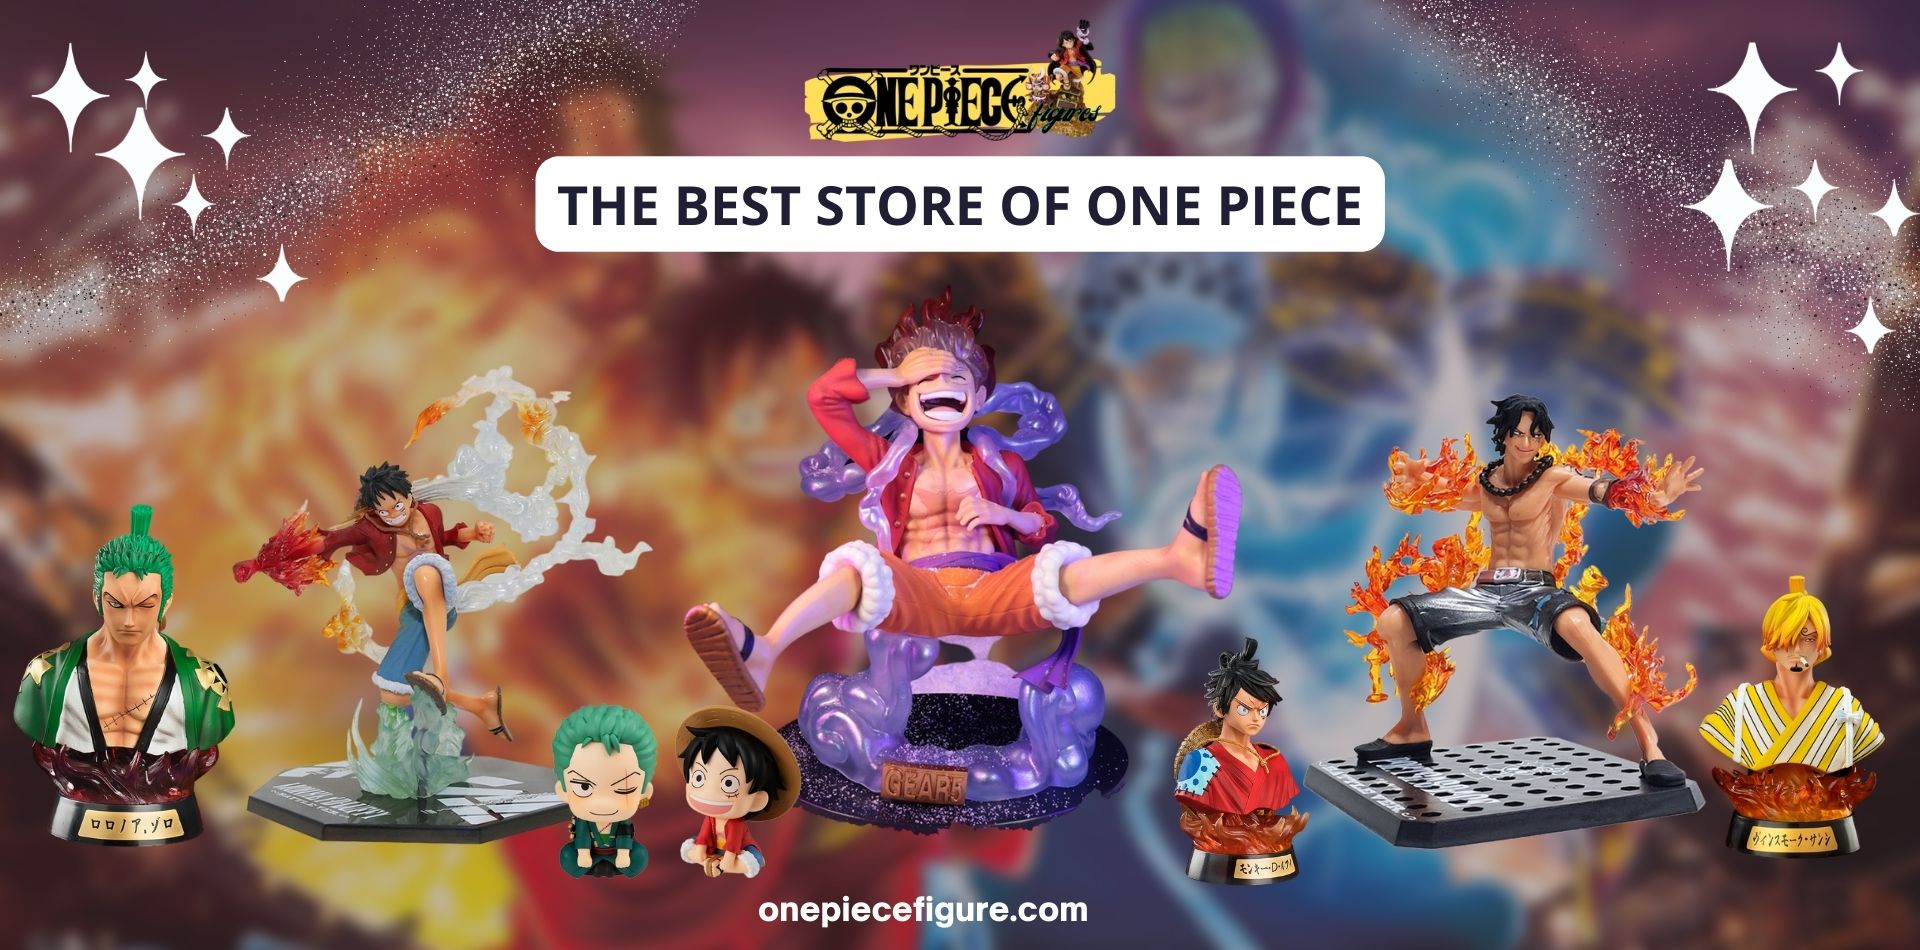 One Piece Store Web Banner - One Piece Figure